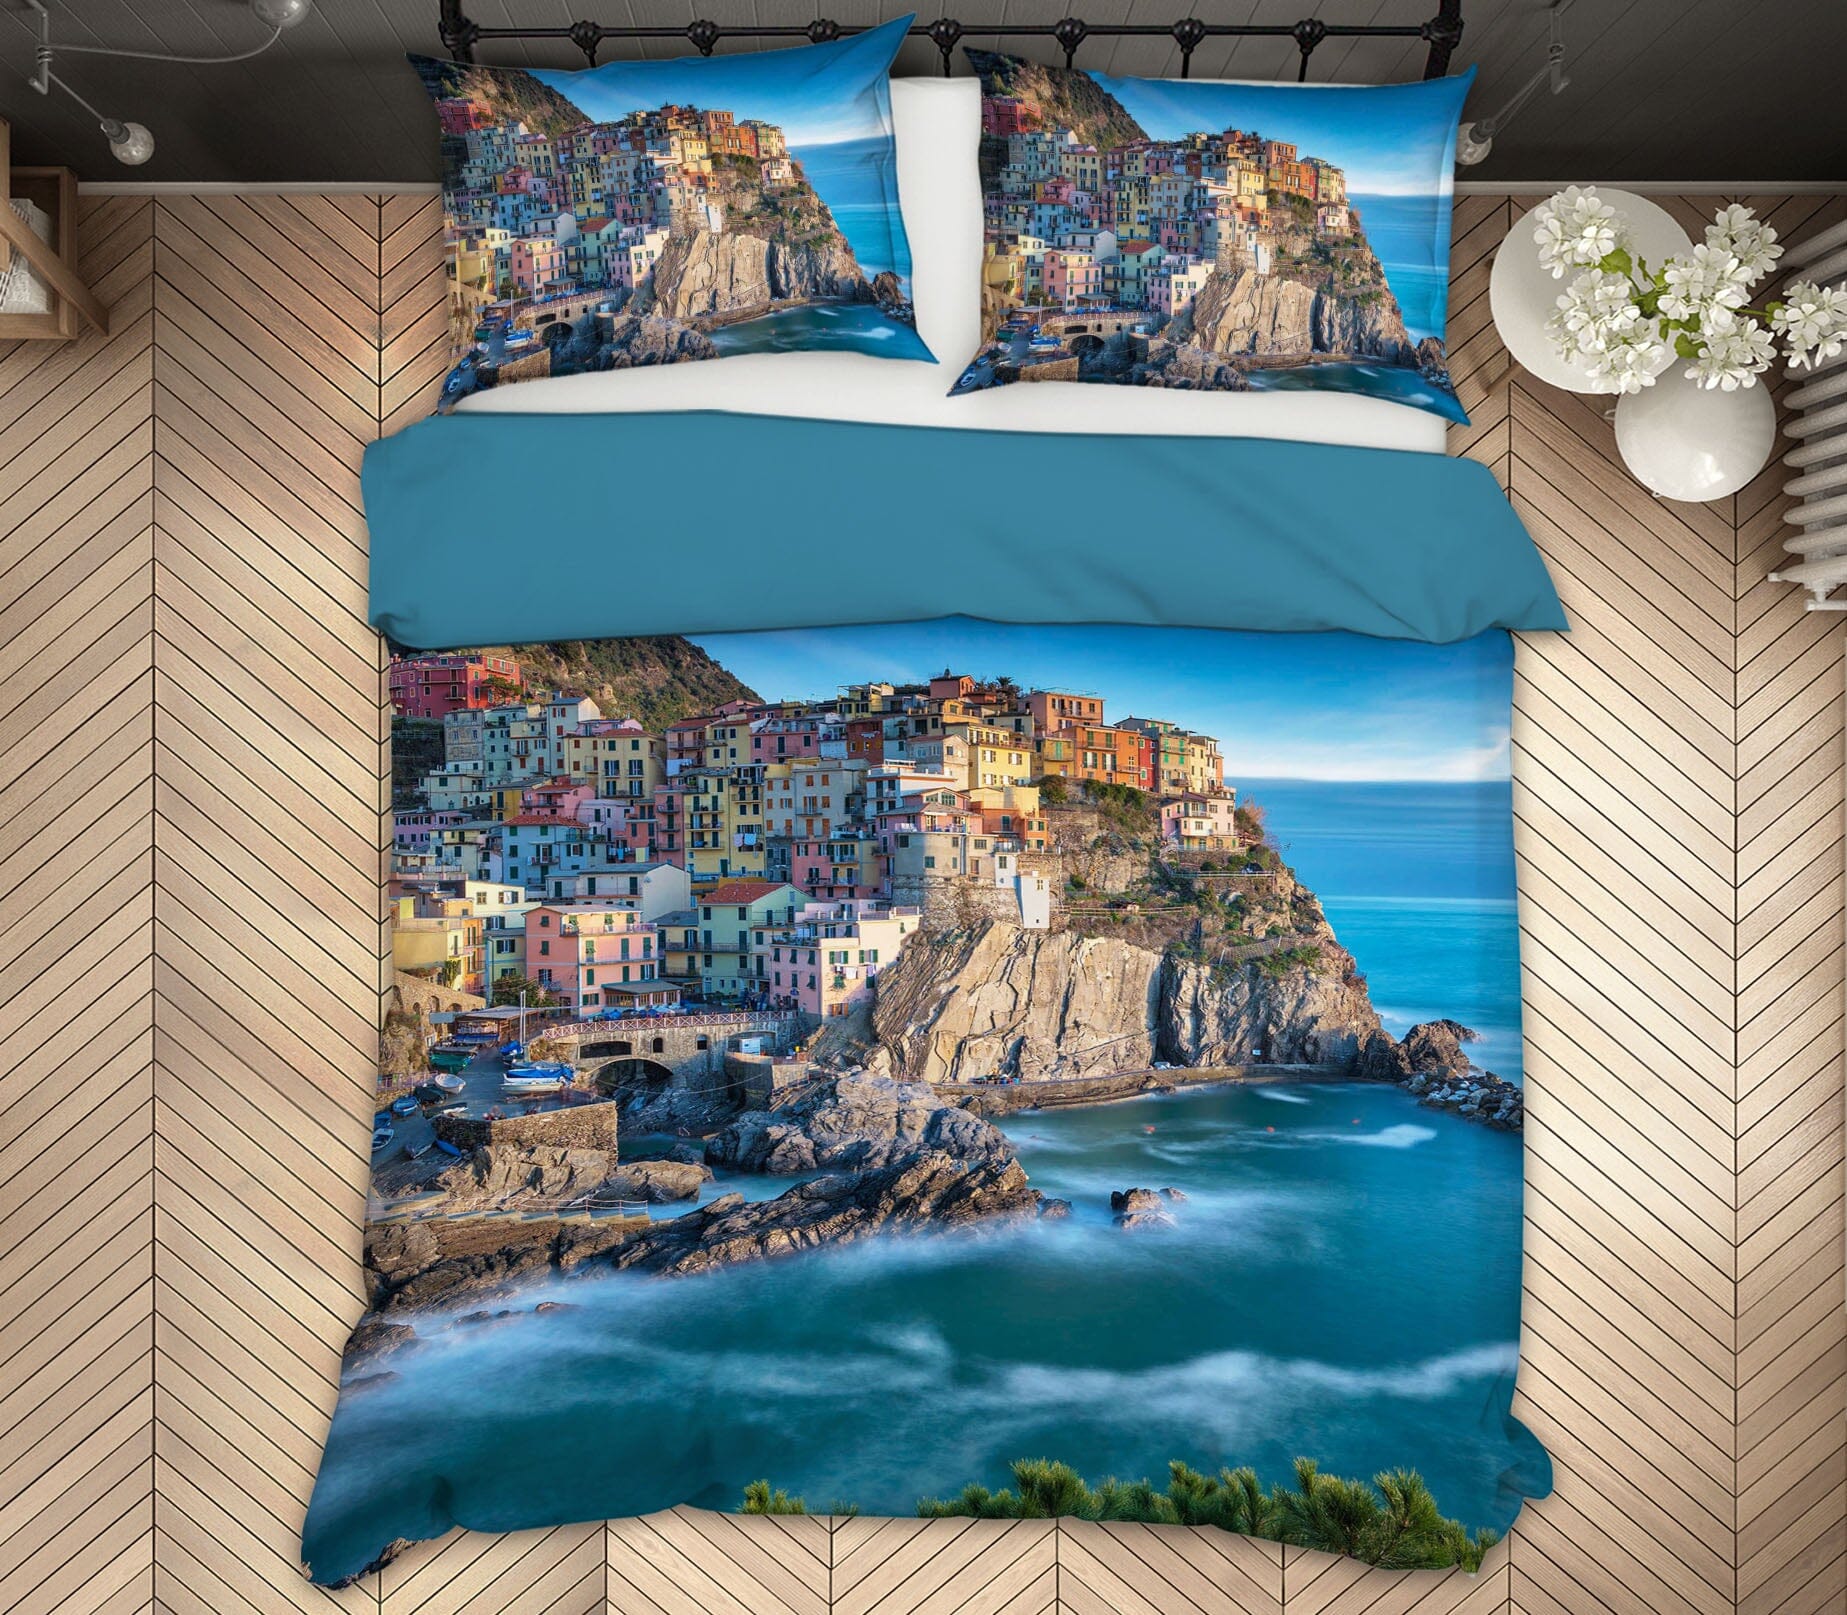 3D Seaside City 2104 Marco Carmassi Bedding Bed Pillowcases Quilt Quiet Covers AJ Creativity Home 